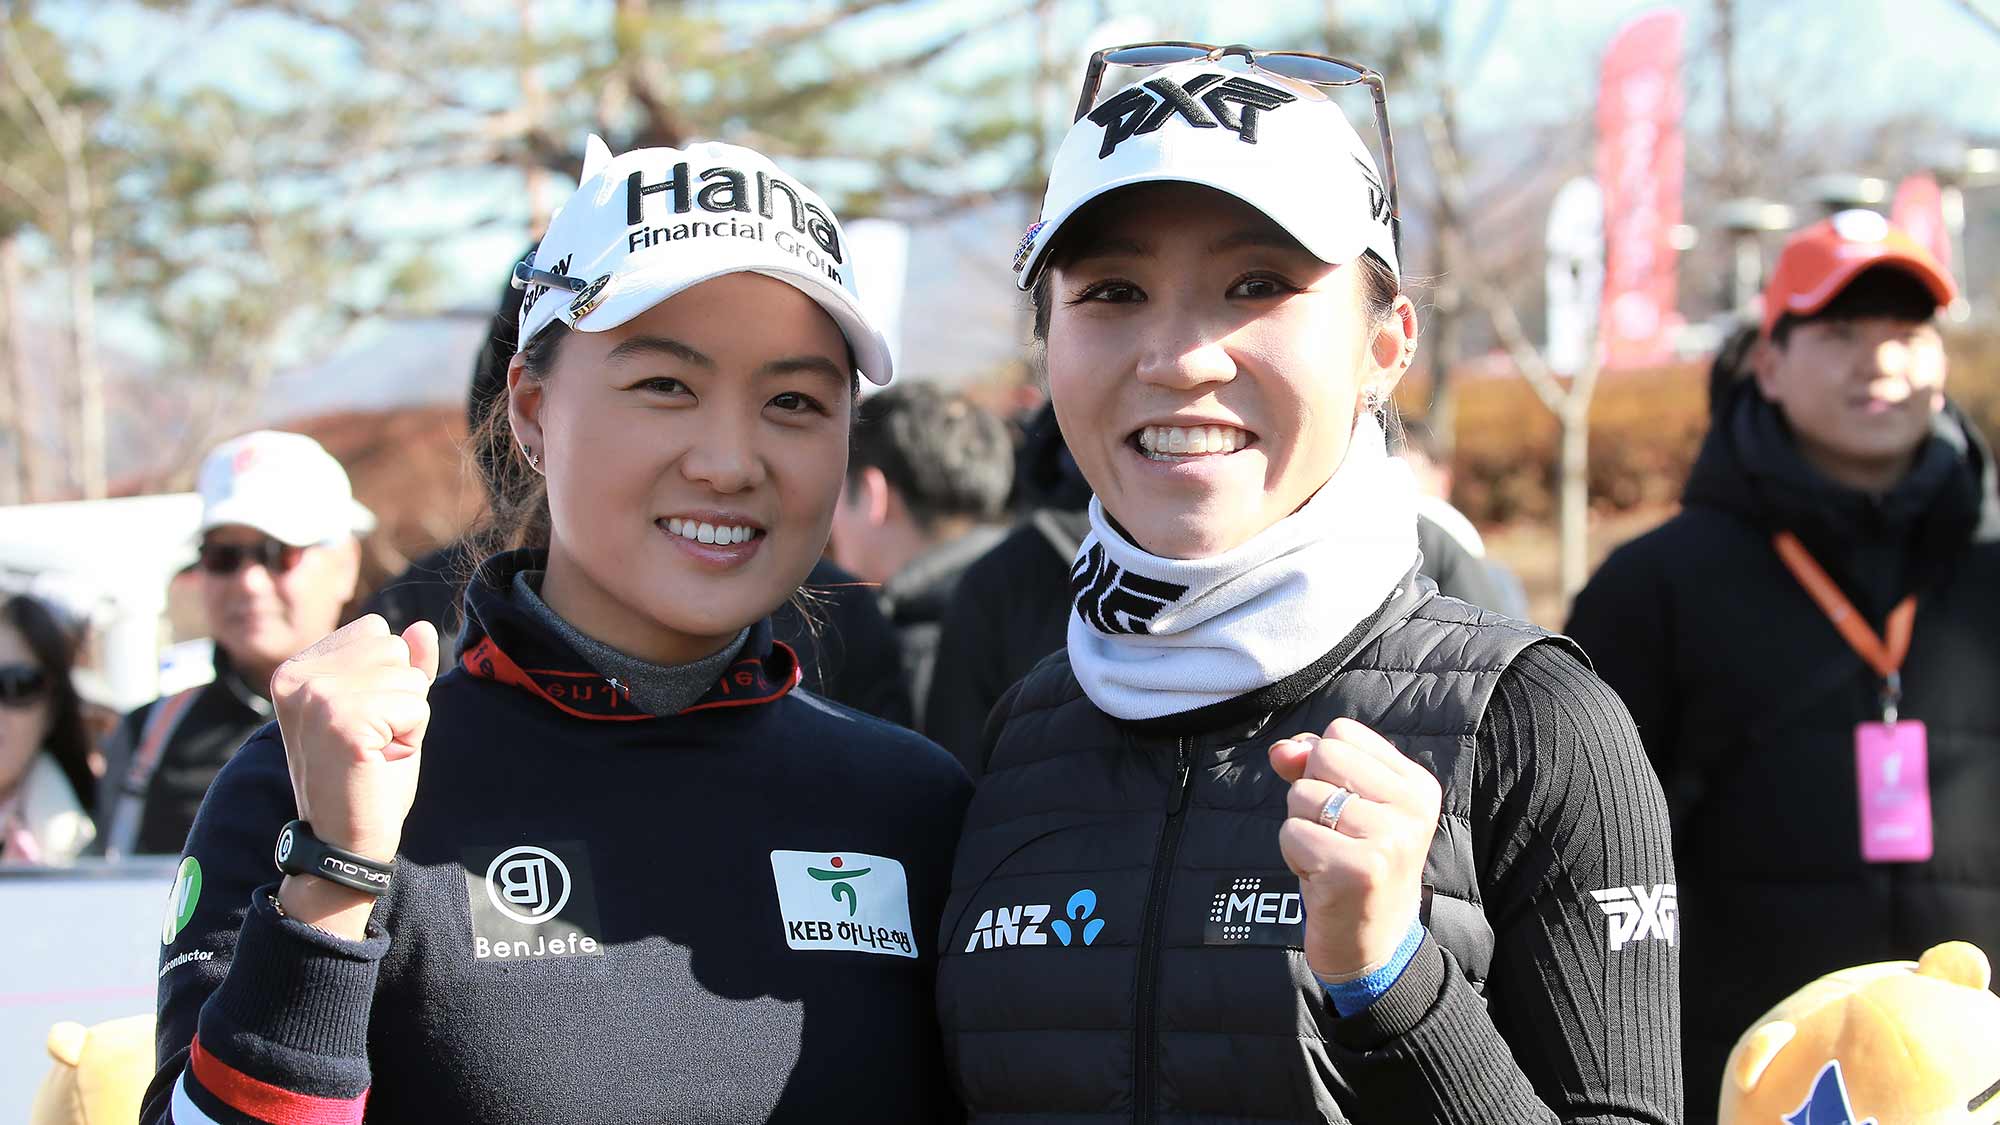 Minjee Lee and Lydia Ko pose for a photo during the Orange Life Champions Trophy Inbee Park Invitational at Blue One The Honors Country Club in Gyeongju, Republic of Korea